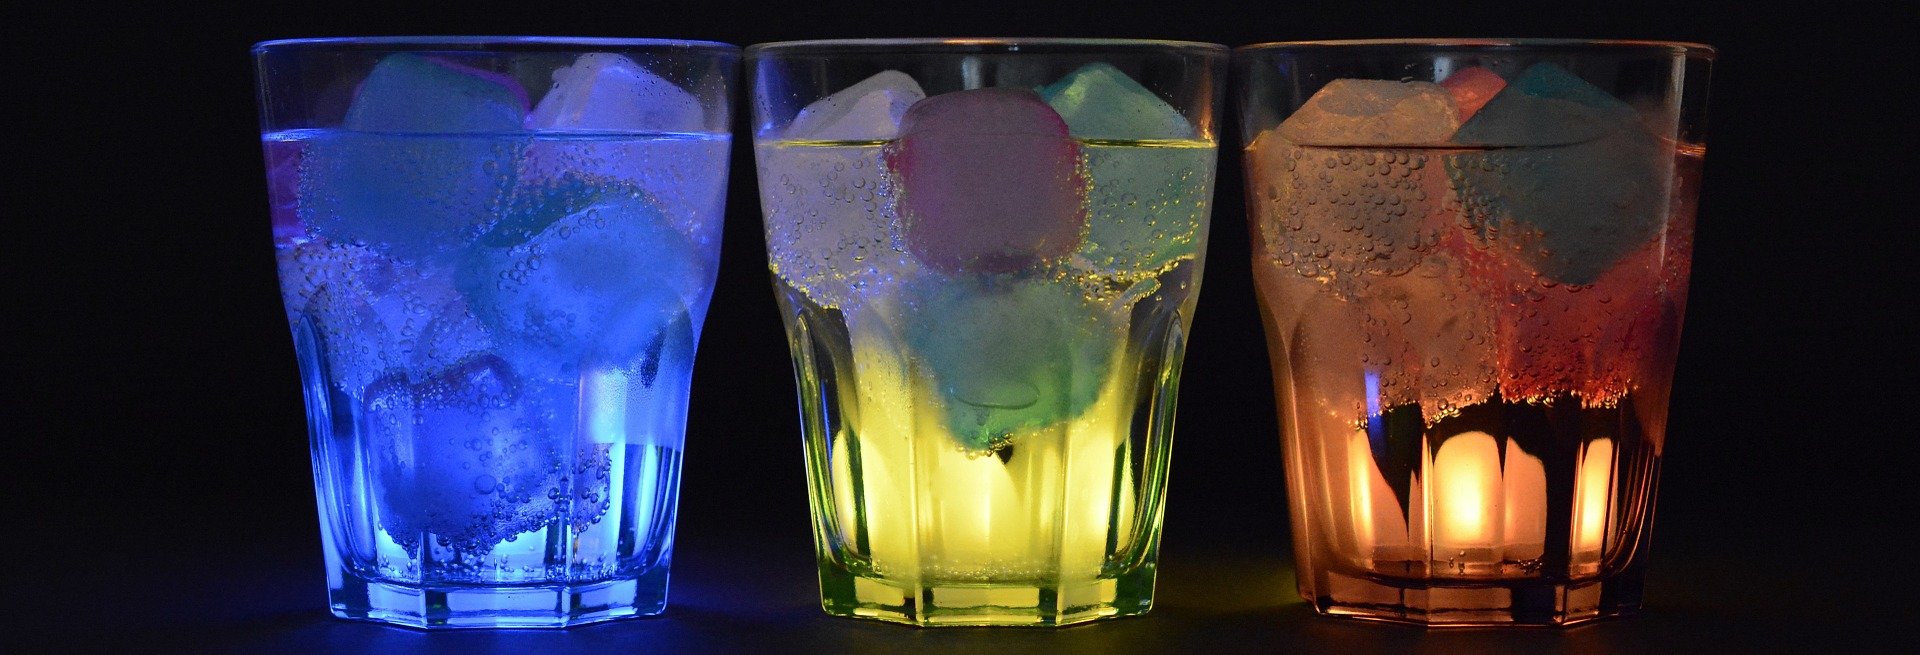 Three glasses with ice lit up in different colors. | Photo: Pixabay/anncapictures 